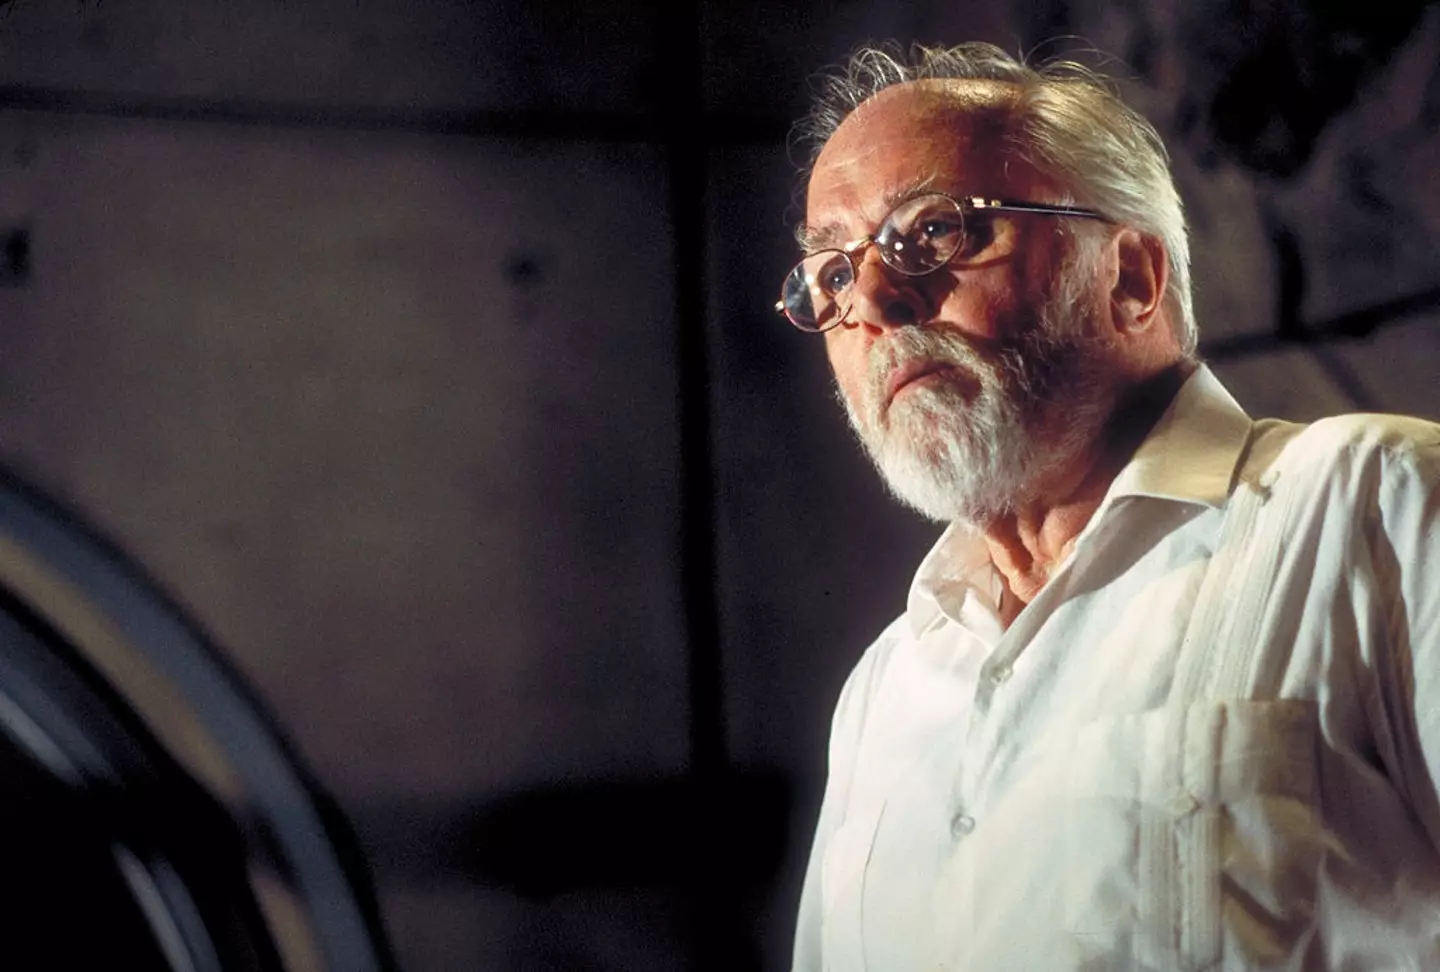 Richard Attenborough became best known for his role in Jurassic Park.